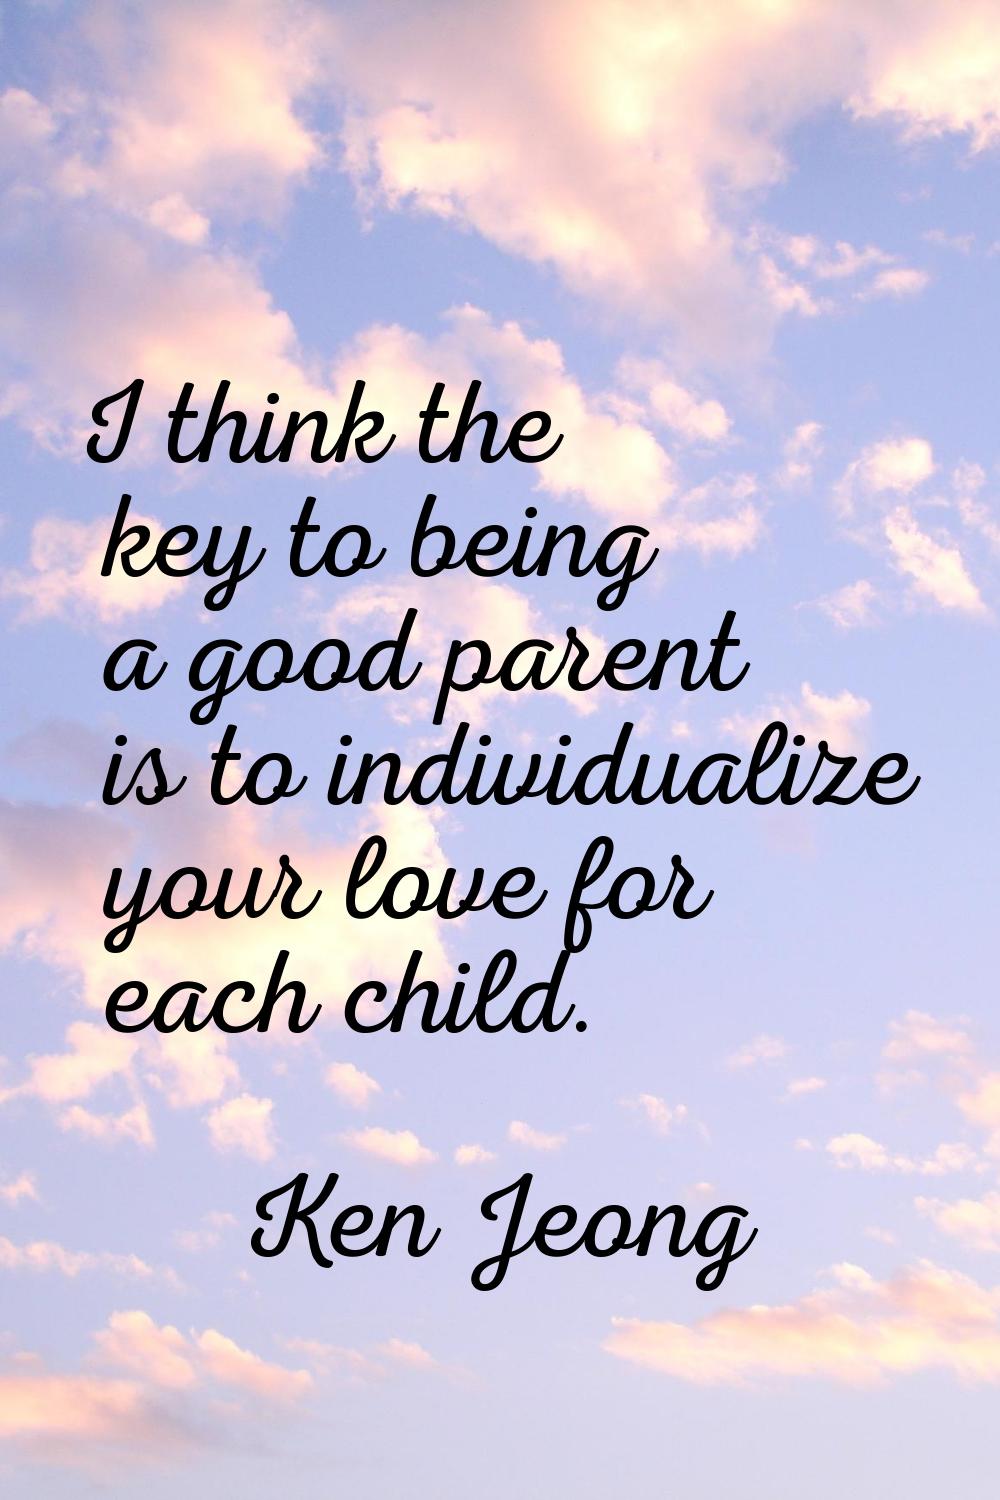 I think the key to being a good parent is to individualize your love for each child.